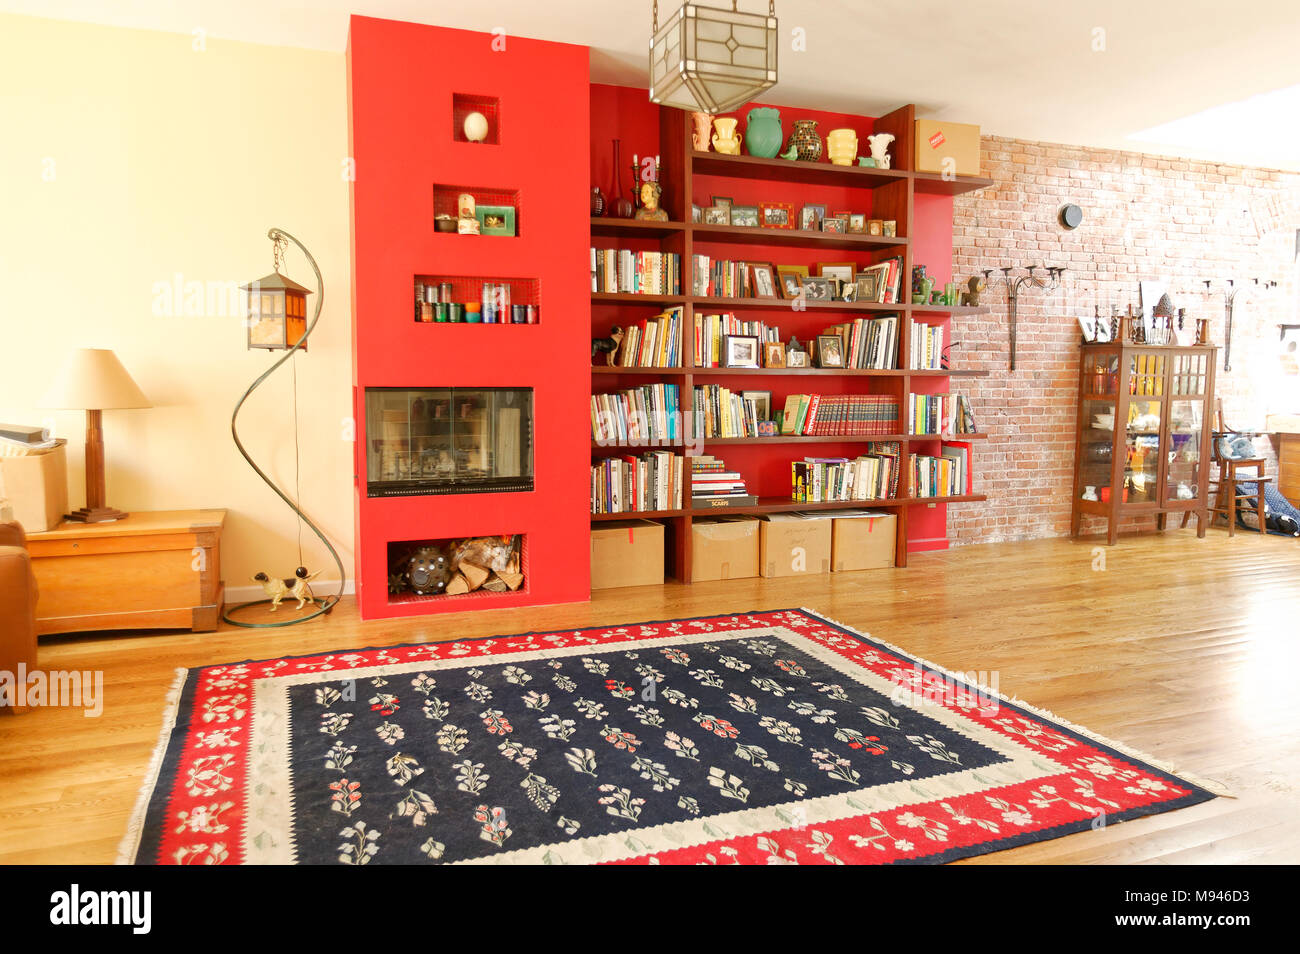 Interior of loft style house with red and yellow coloring Stock Photo